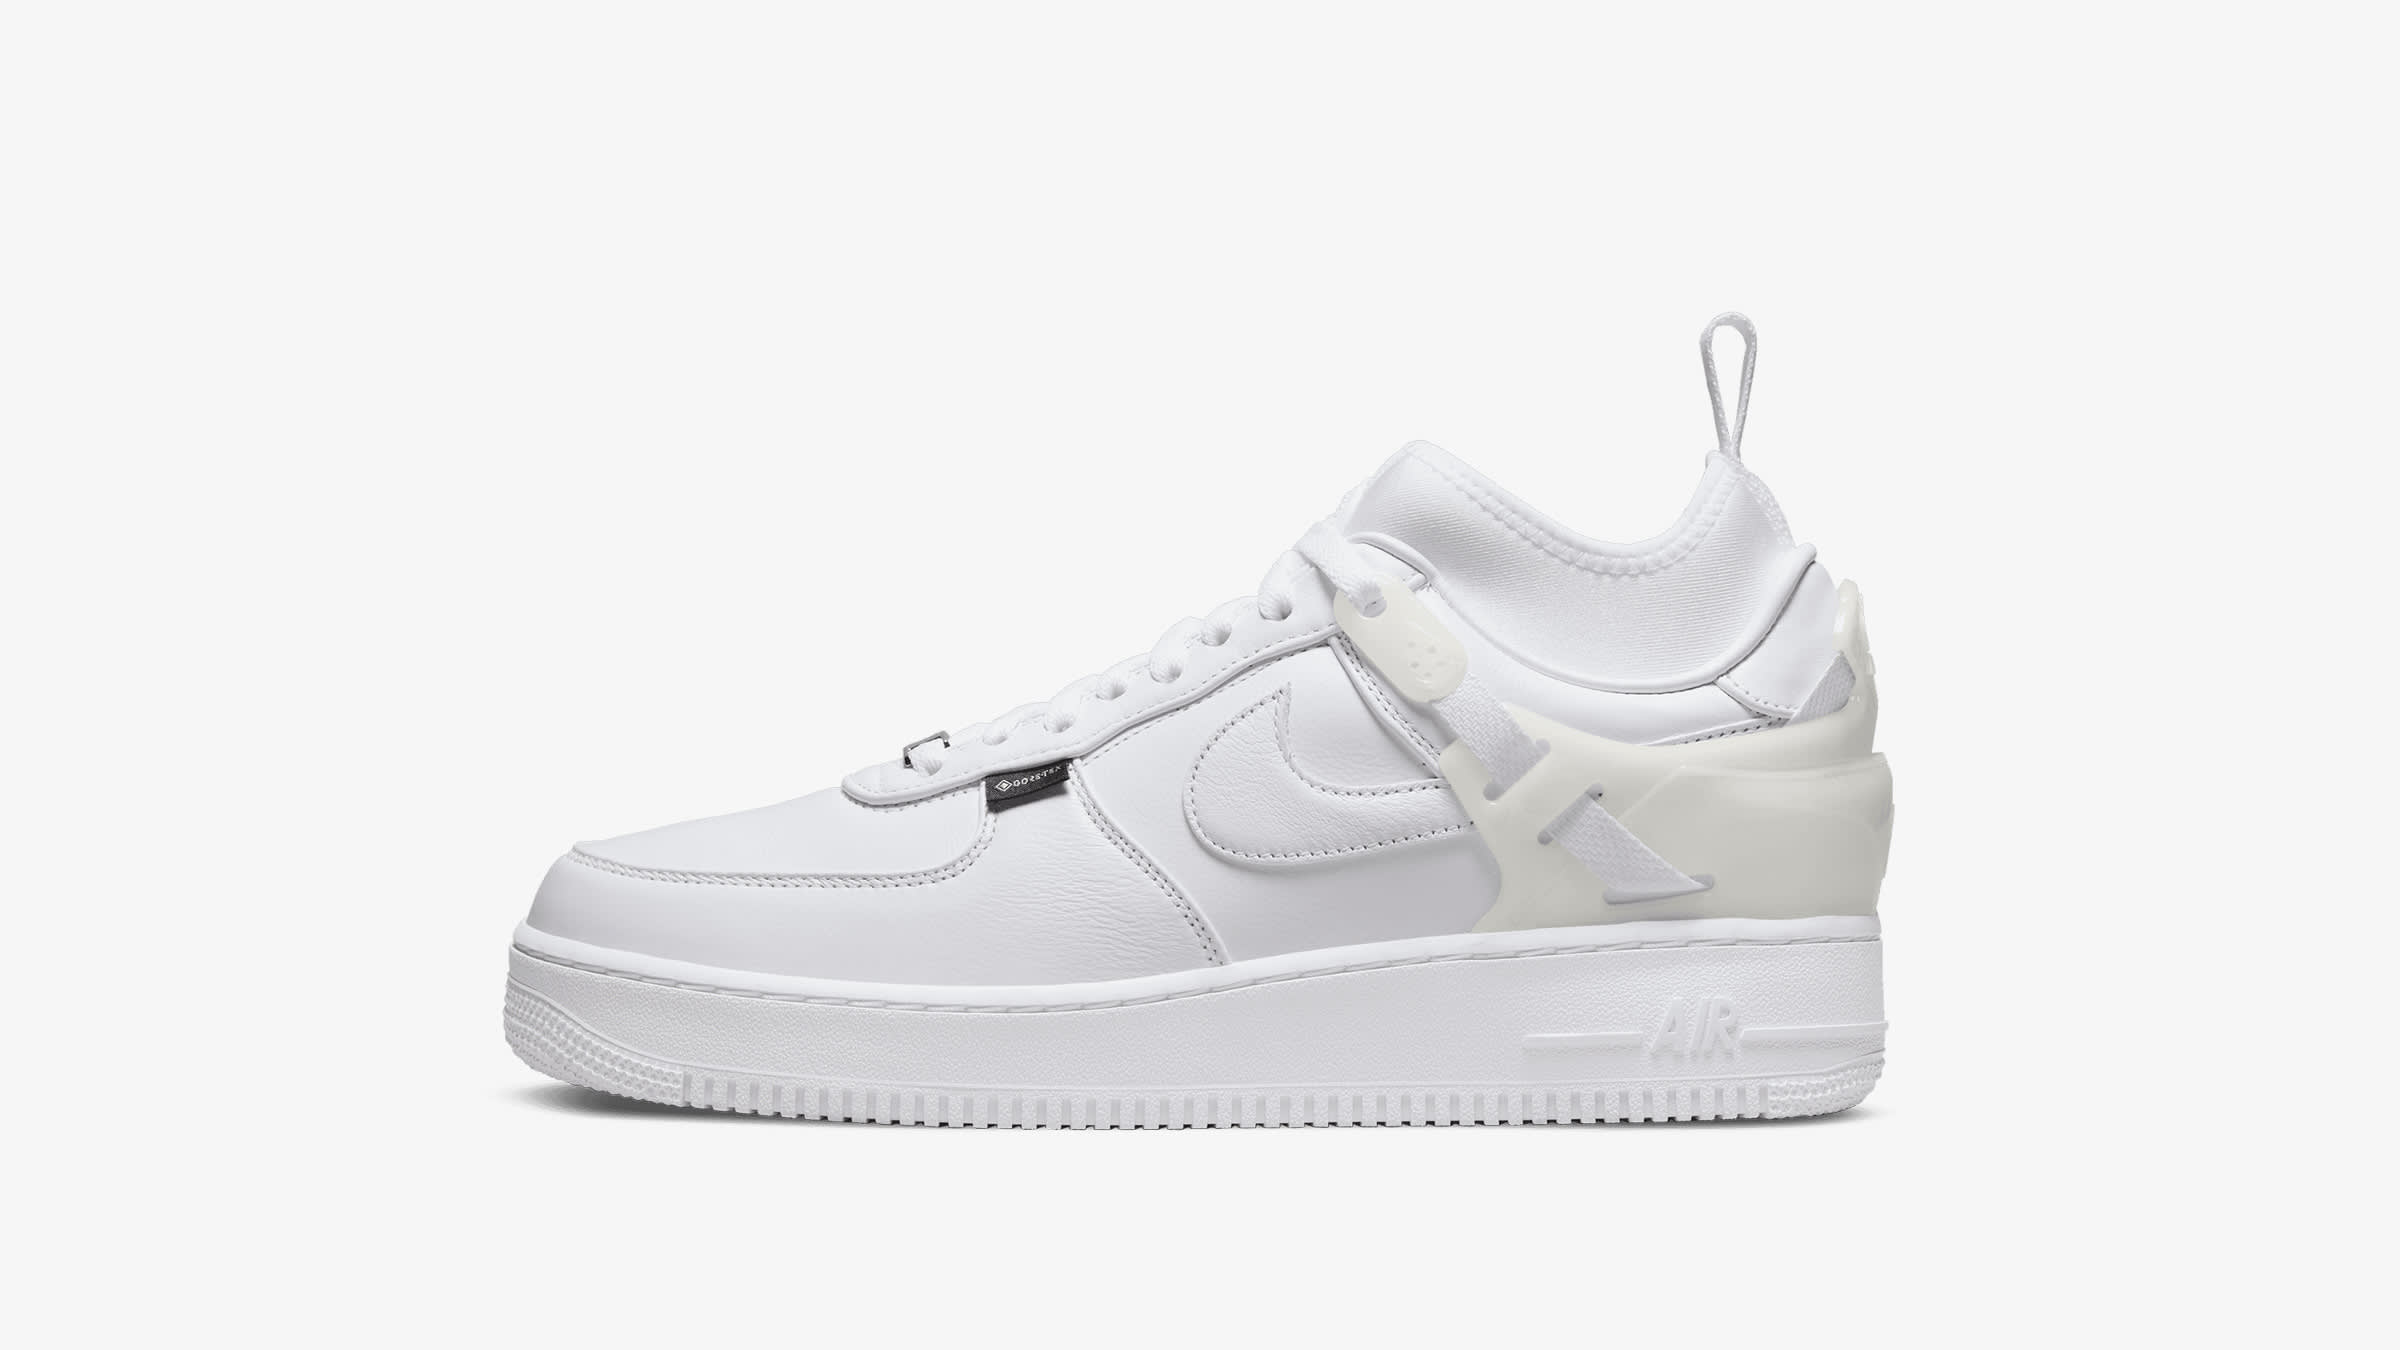 Nike x Undercover Air Force 1 Low SP (White & Sail) | END. Launches